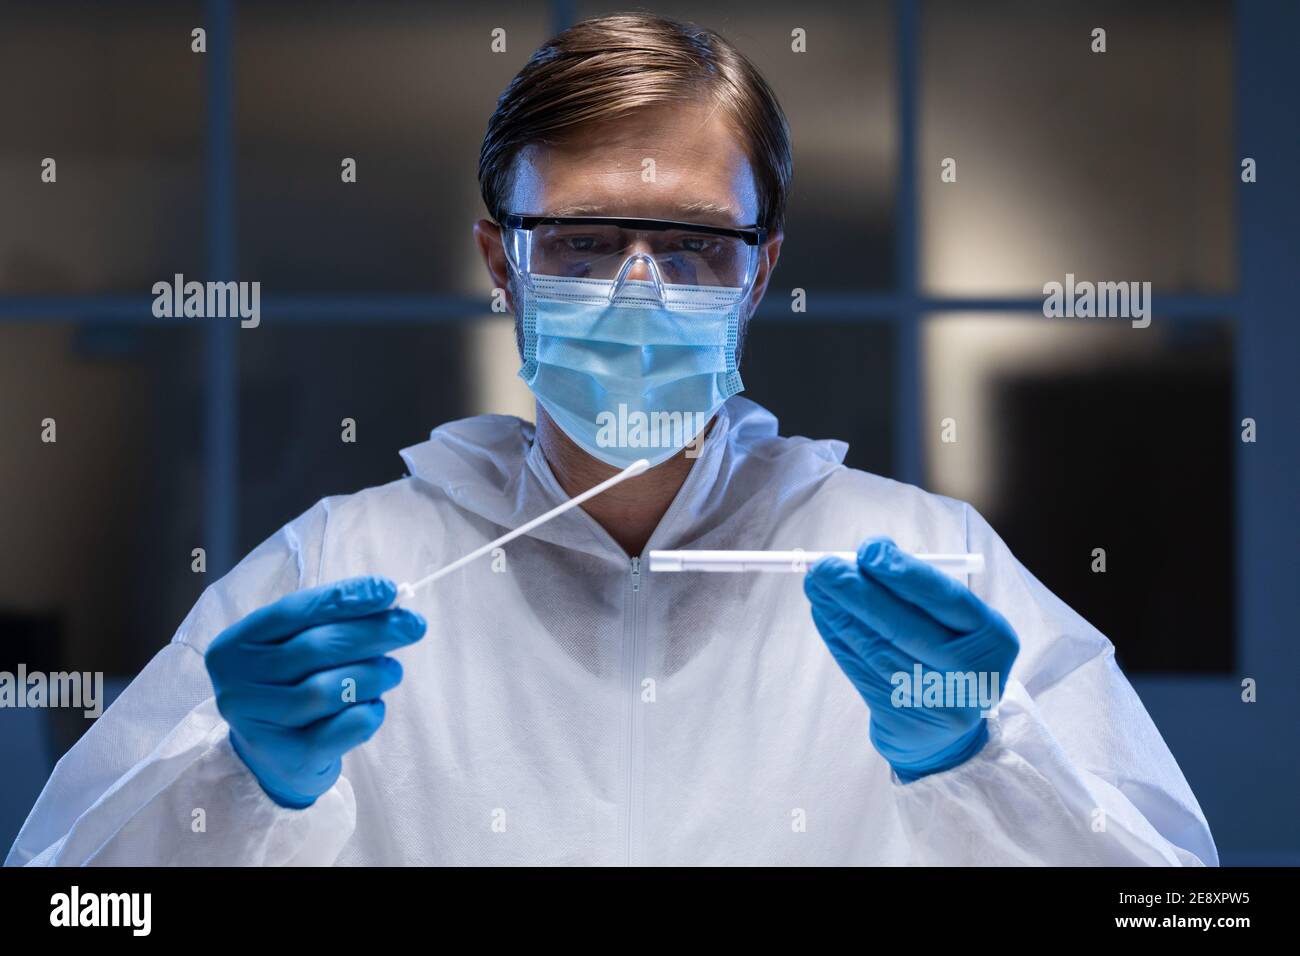 Caucasian male medical worker wearing protective clothing and face mask inspecting swab in lab Stock Photo